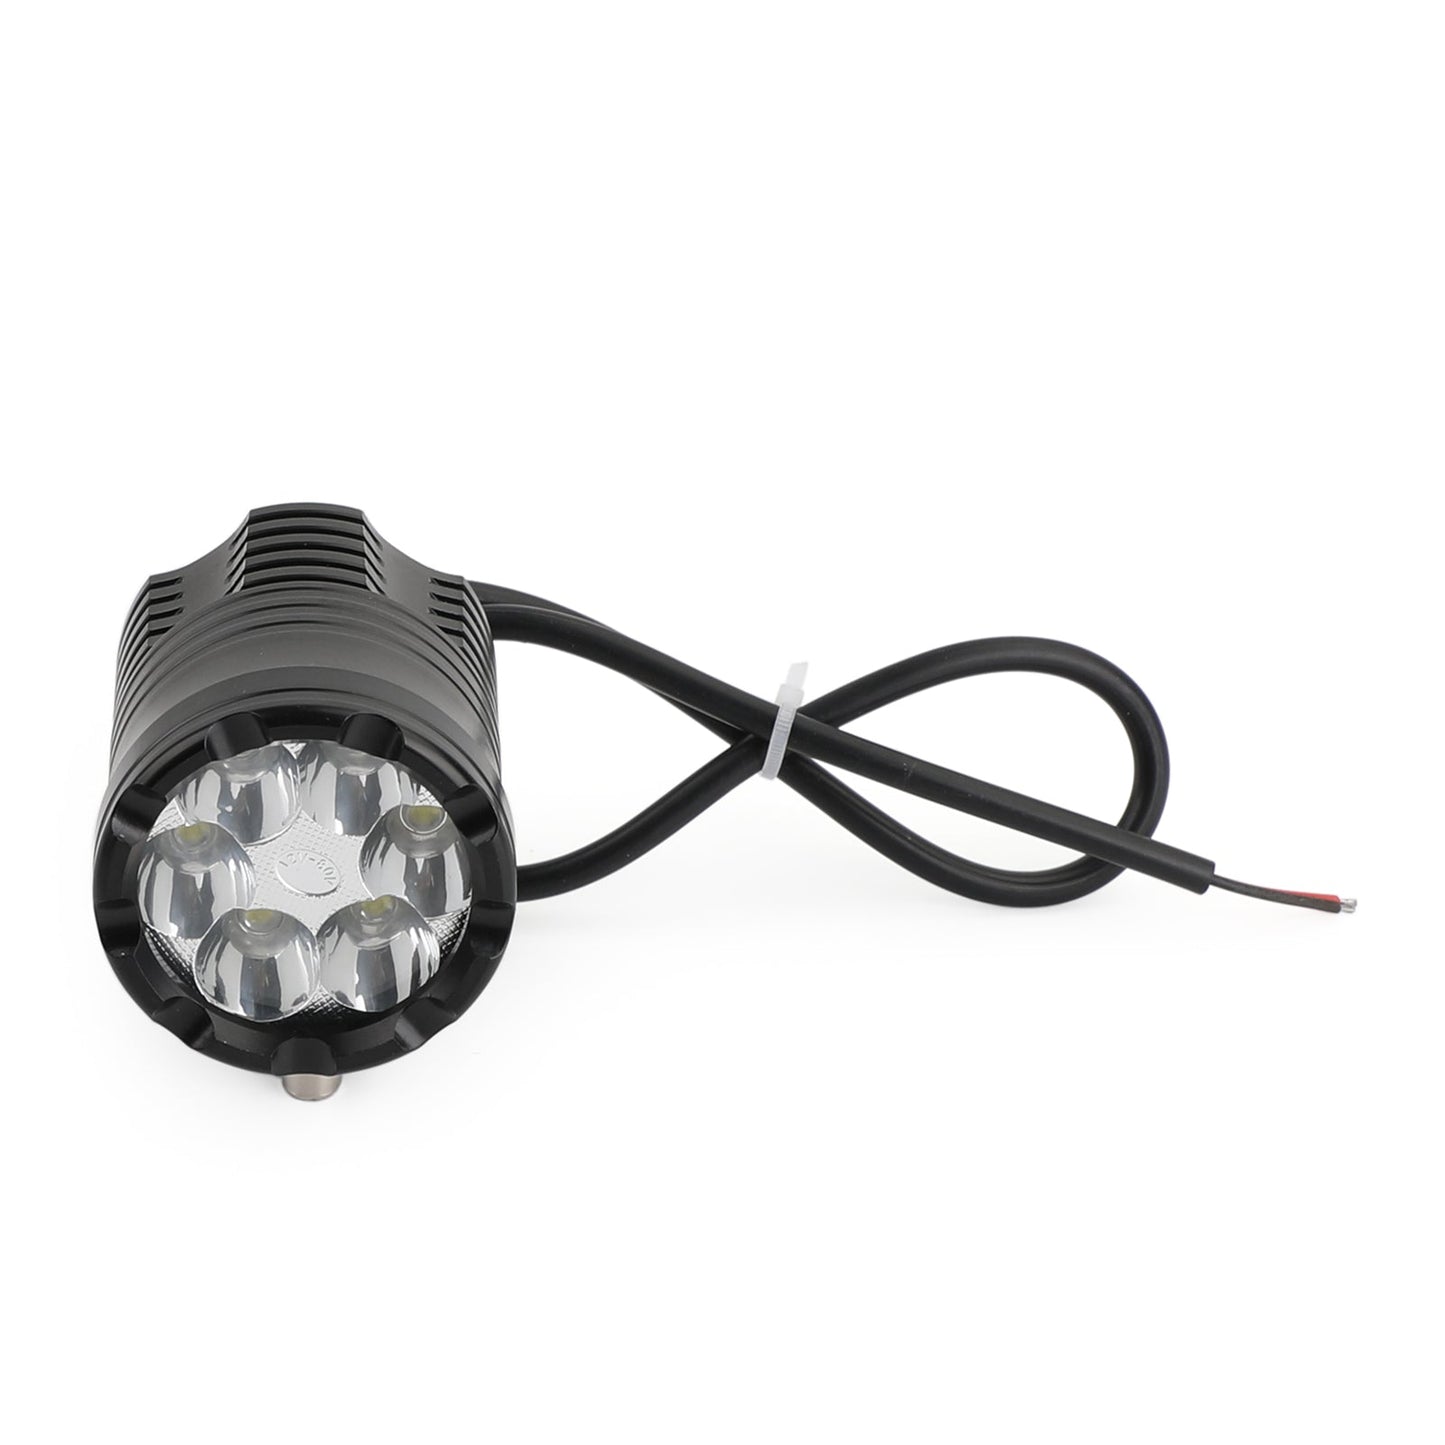 12V-80V DC 6 LED Electric Bicycle Bike Ultra bright Waterproof 1800LM Powerful Headlight Motorcycle Light BLK,